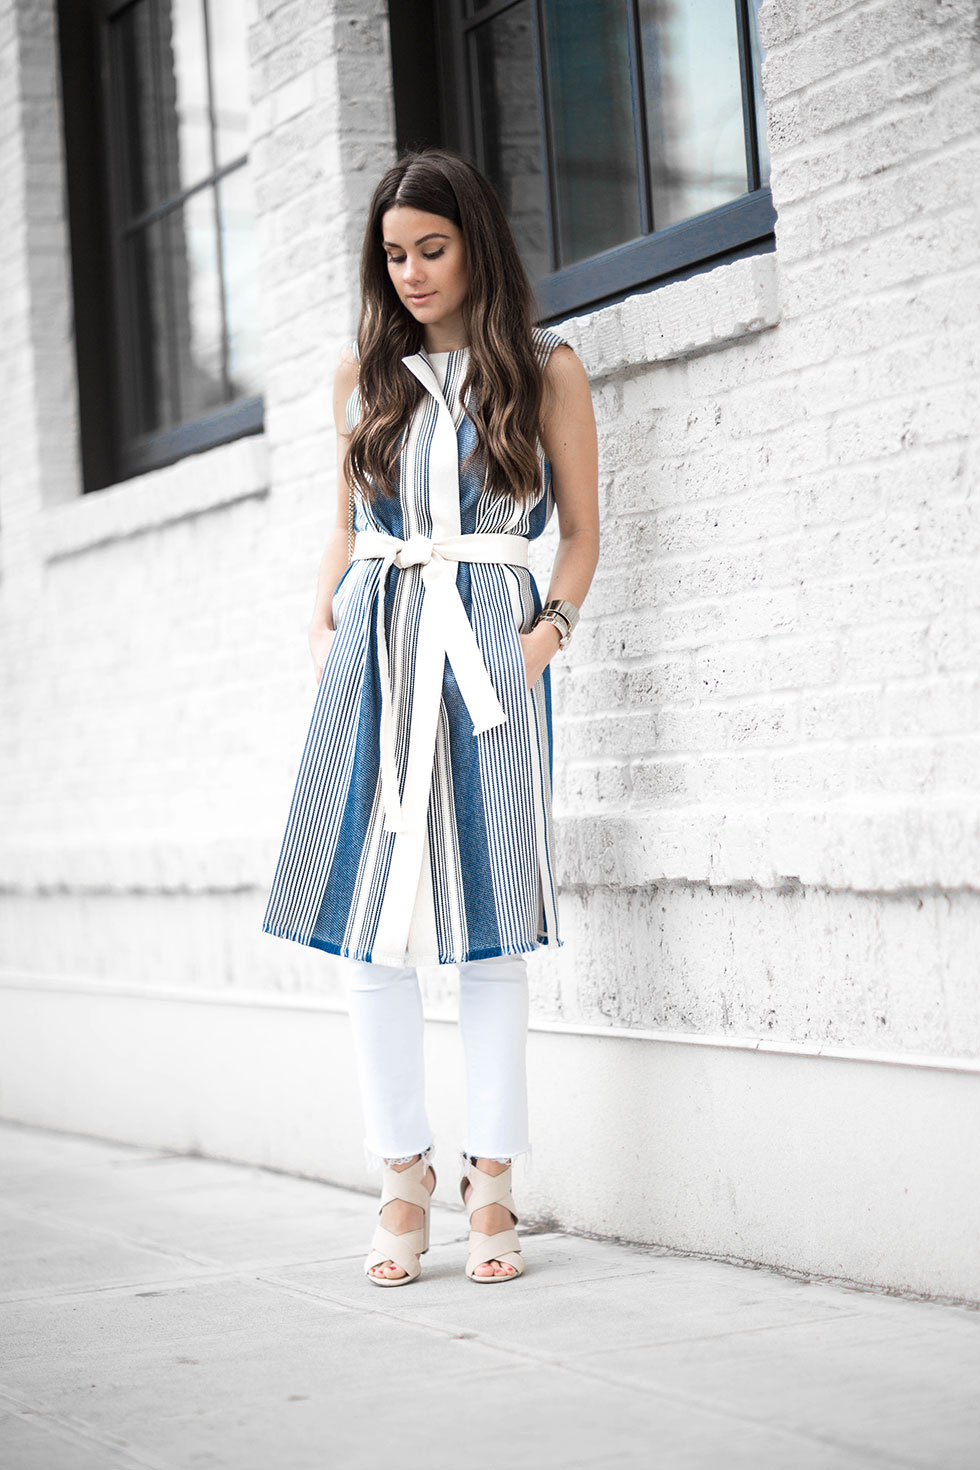 How to wear a belted stripe vest this spring featuring Lafayette 148 New York Fergie Belted Striped Vest